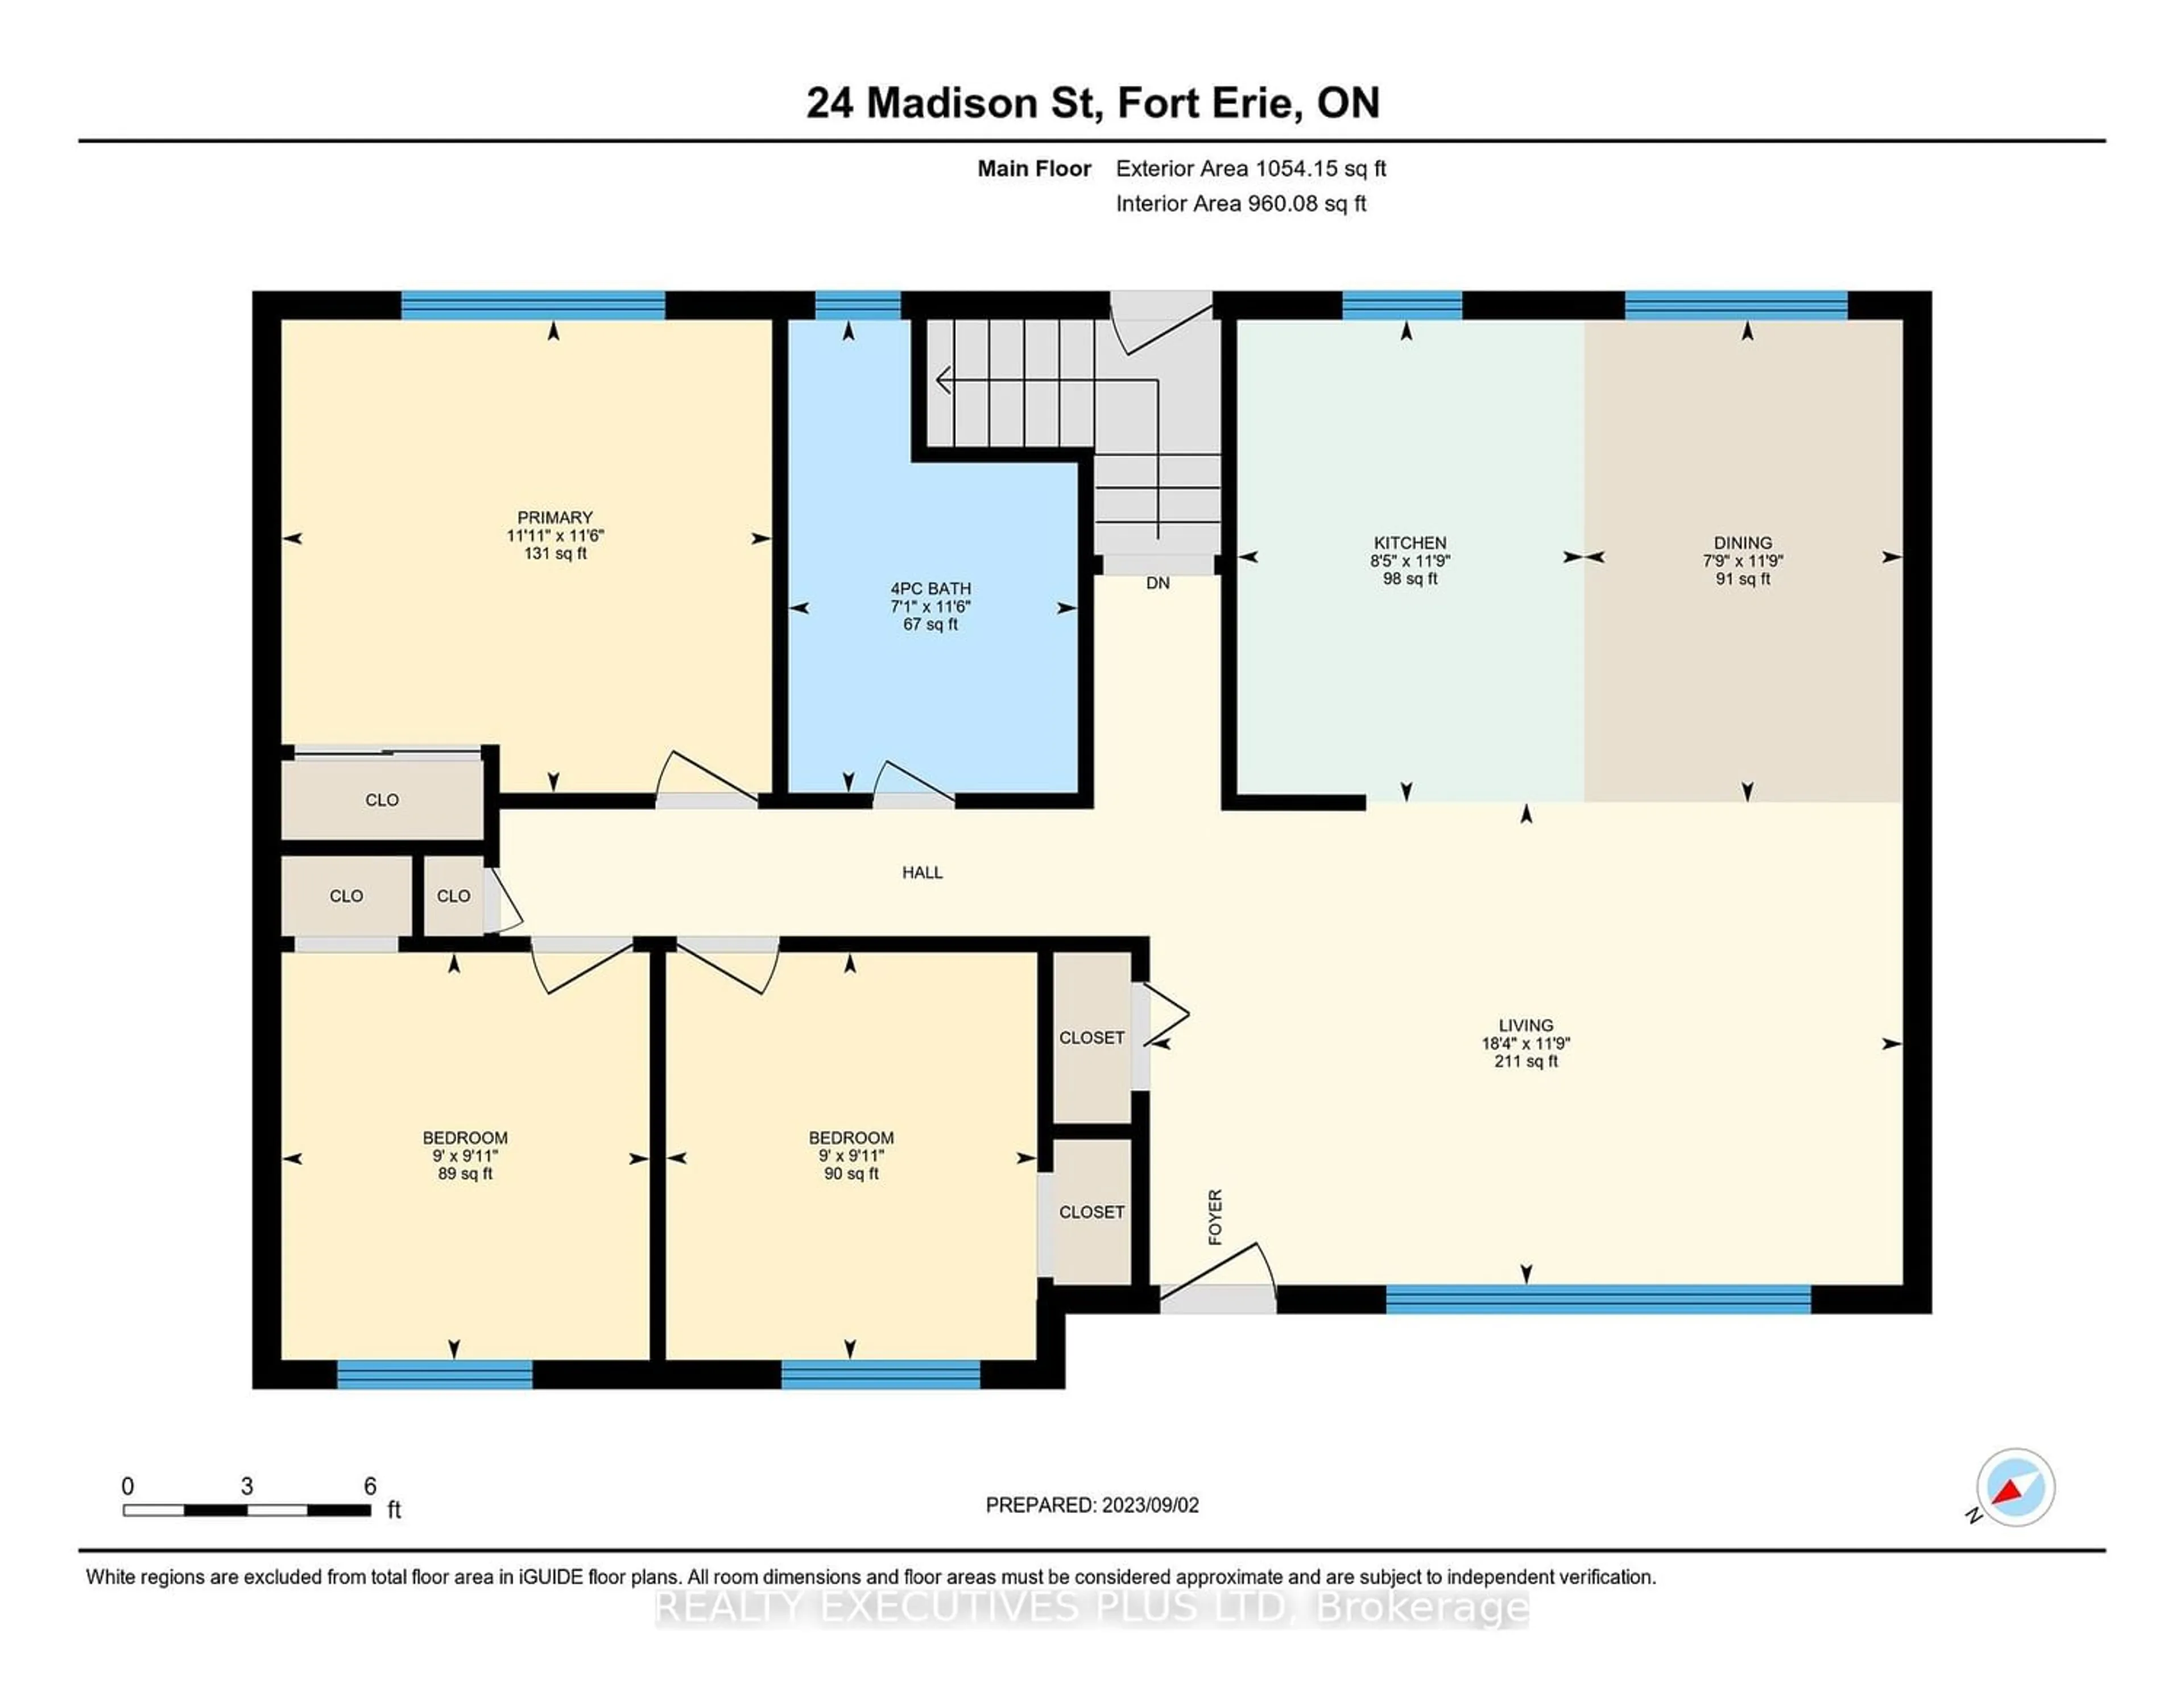 Floor plan for 24 Madison St, Fort Erie Ontario L2A 3Z8